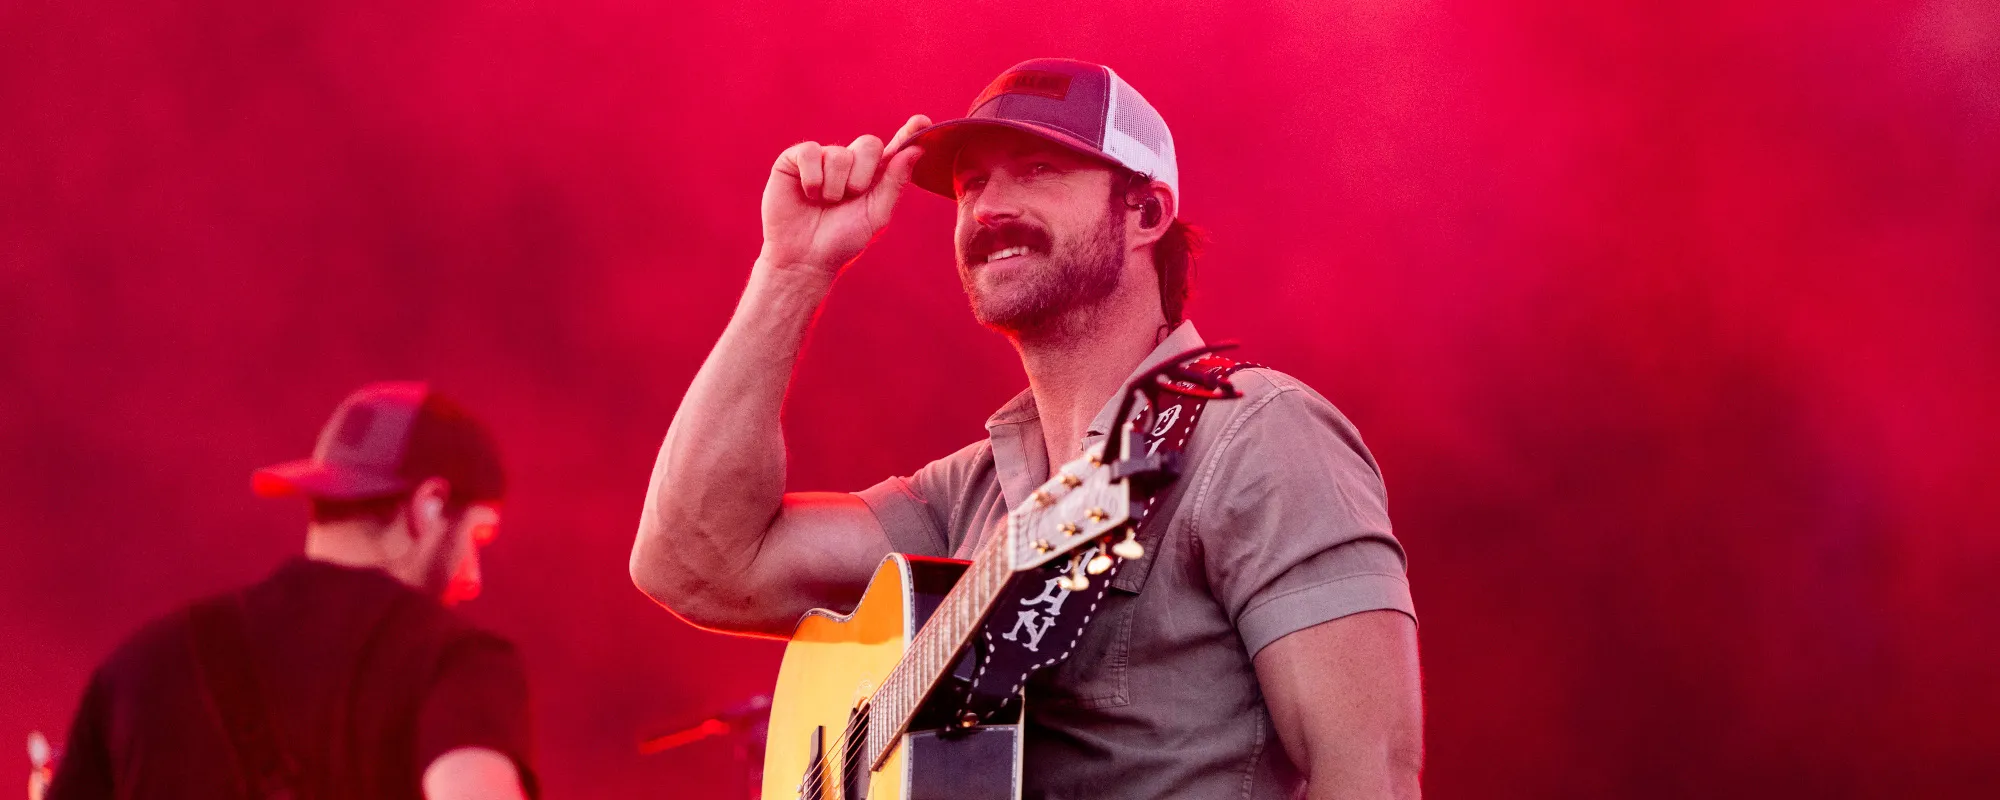 LISTEN: Riley Green Releases New Rendition of “Different ‘Round Here” Featuring Luke Combs